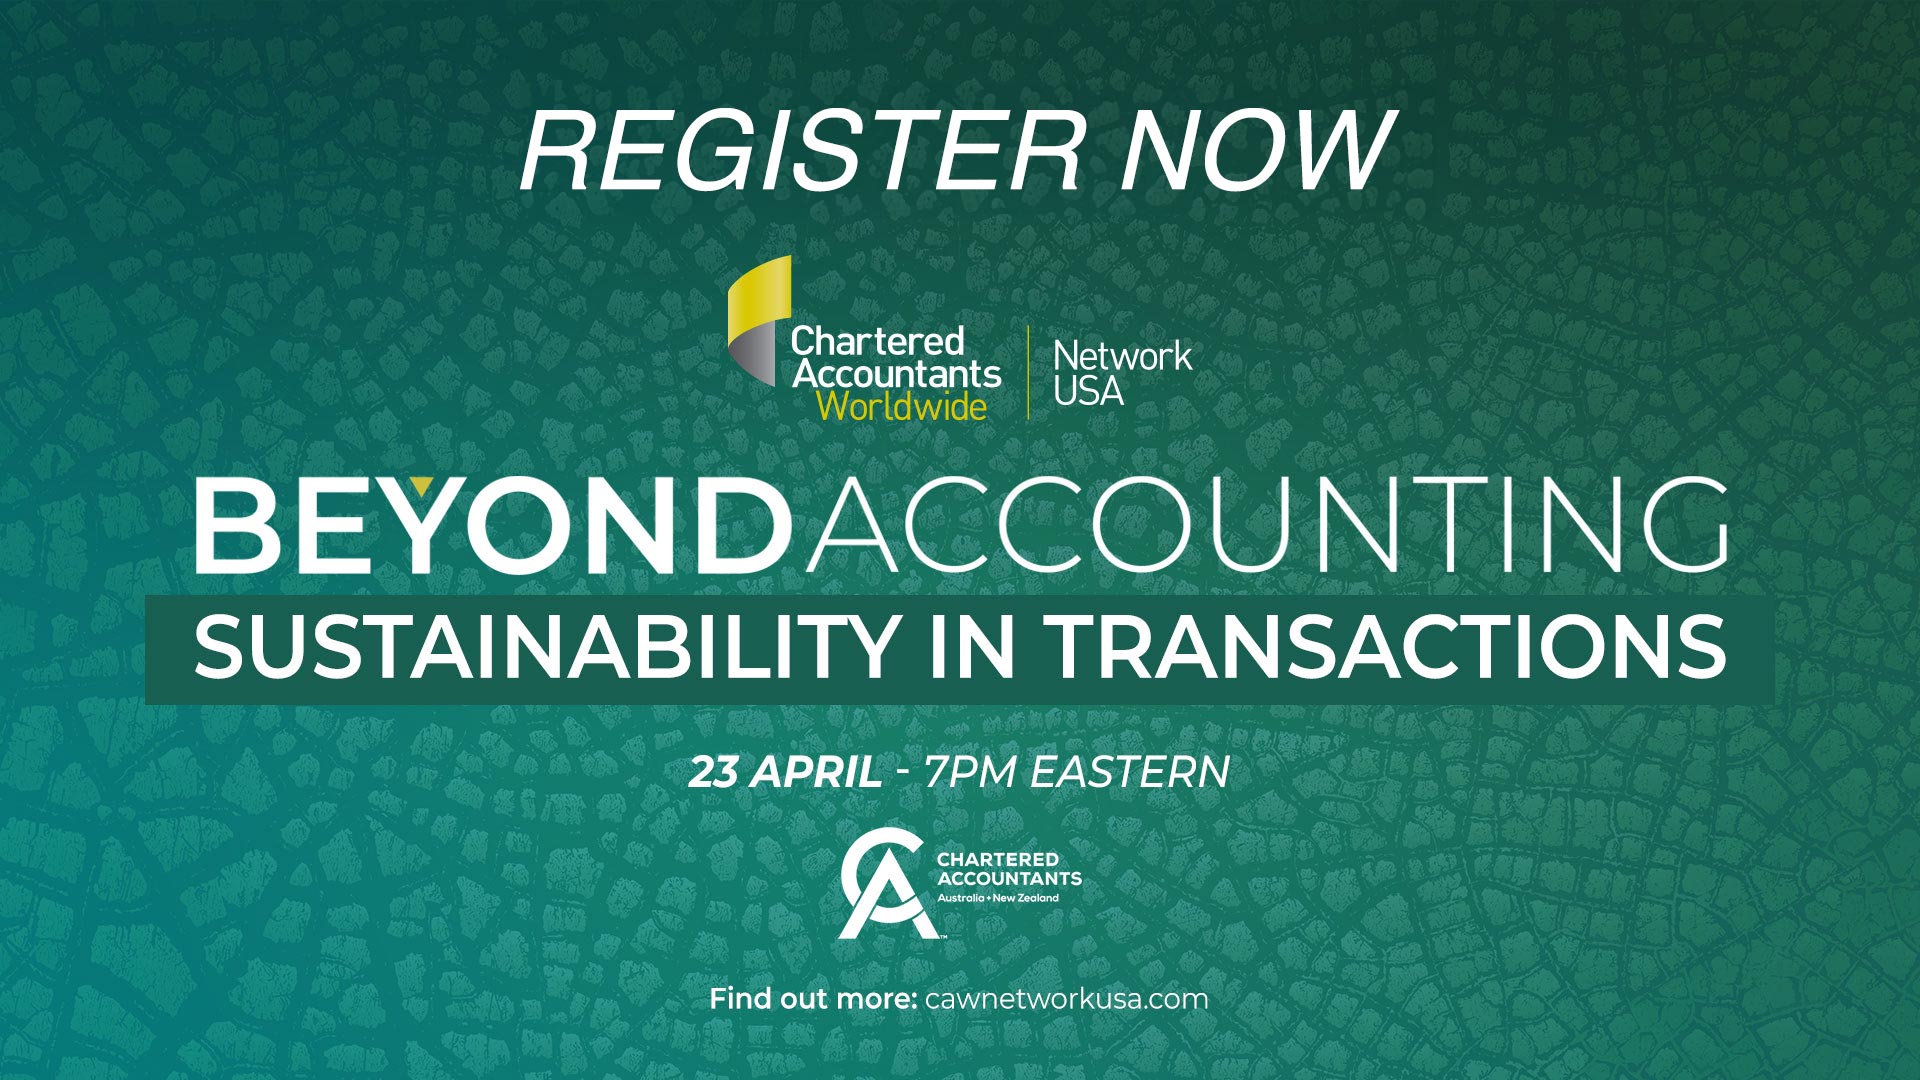 Beyond Accounting: Sustainability in Transactions